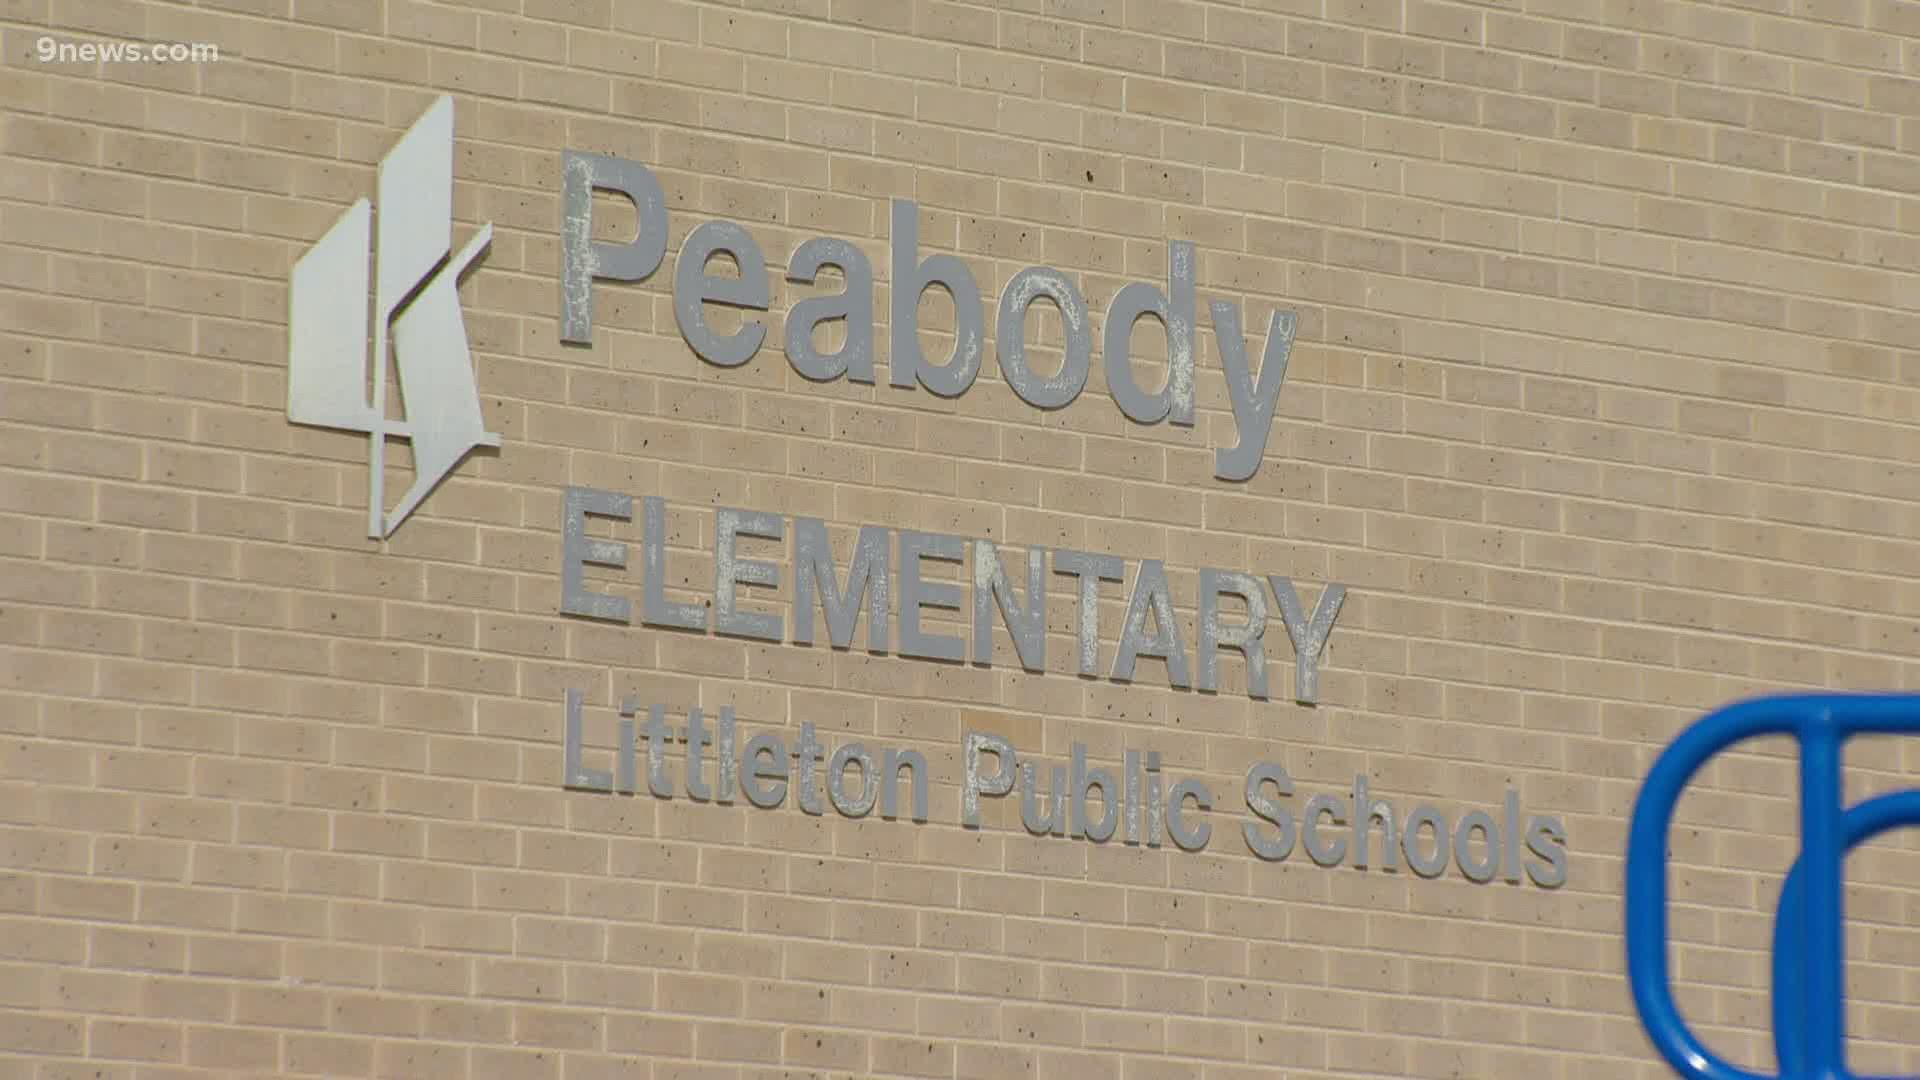 Littleton Public Schools has come up with a plan for dealing with declining enrollment.